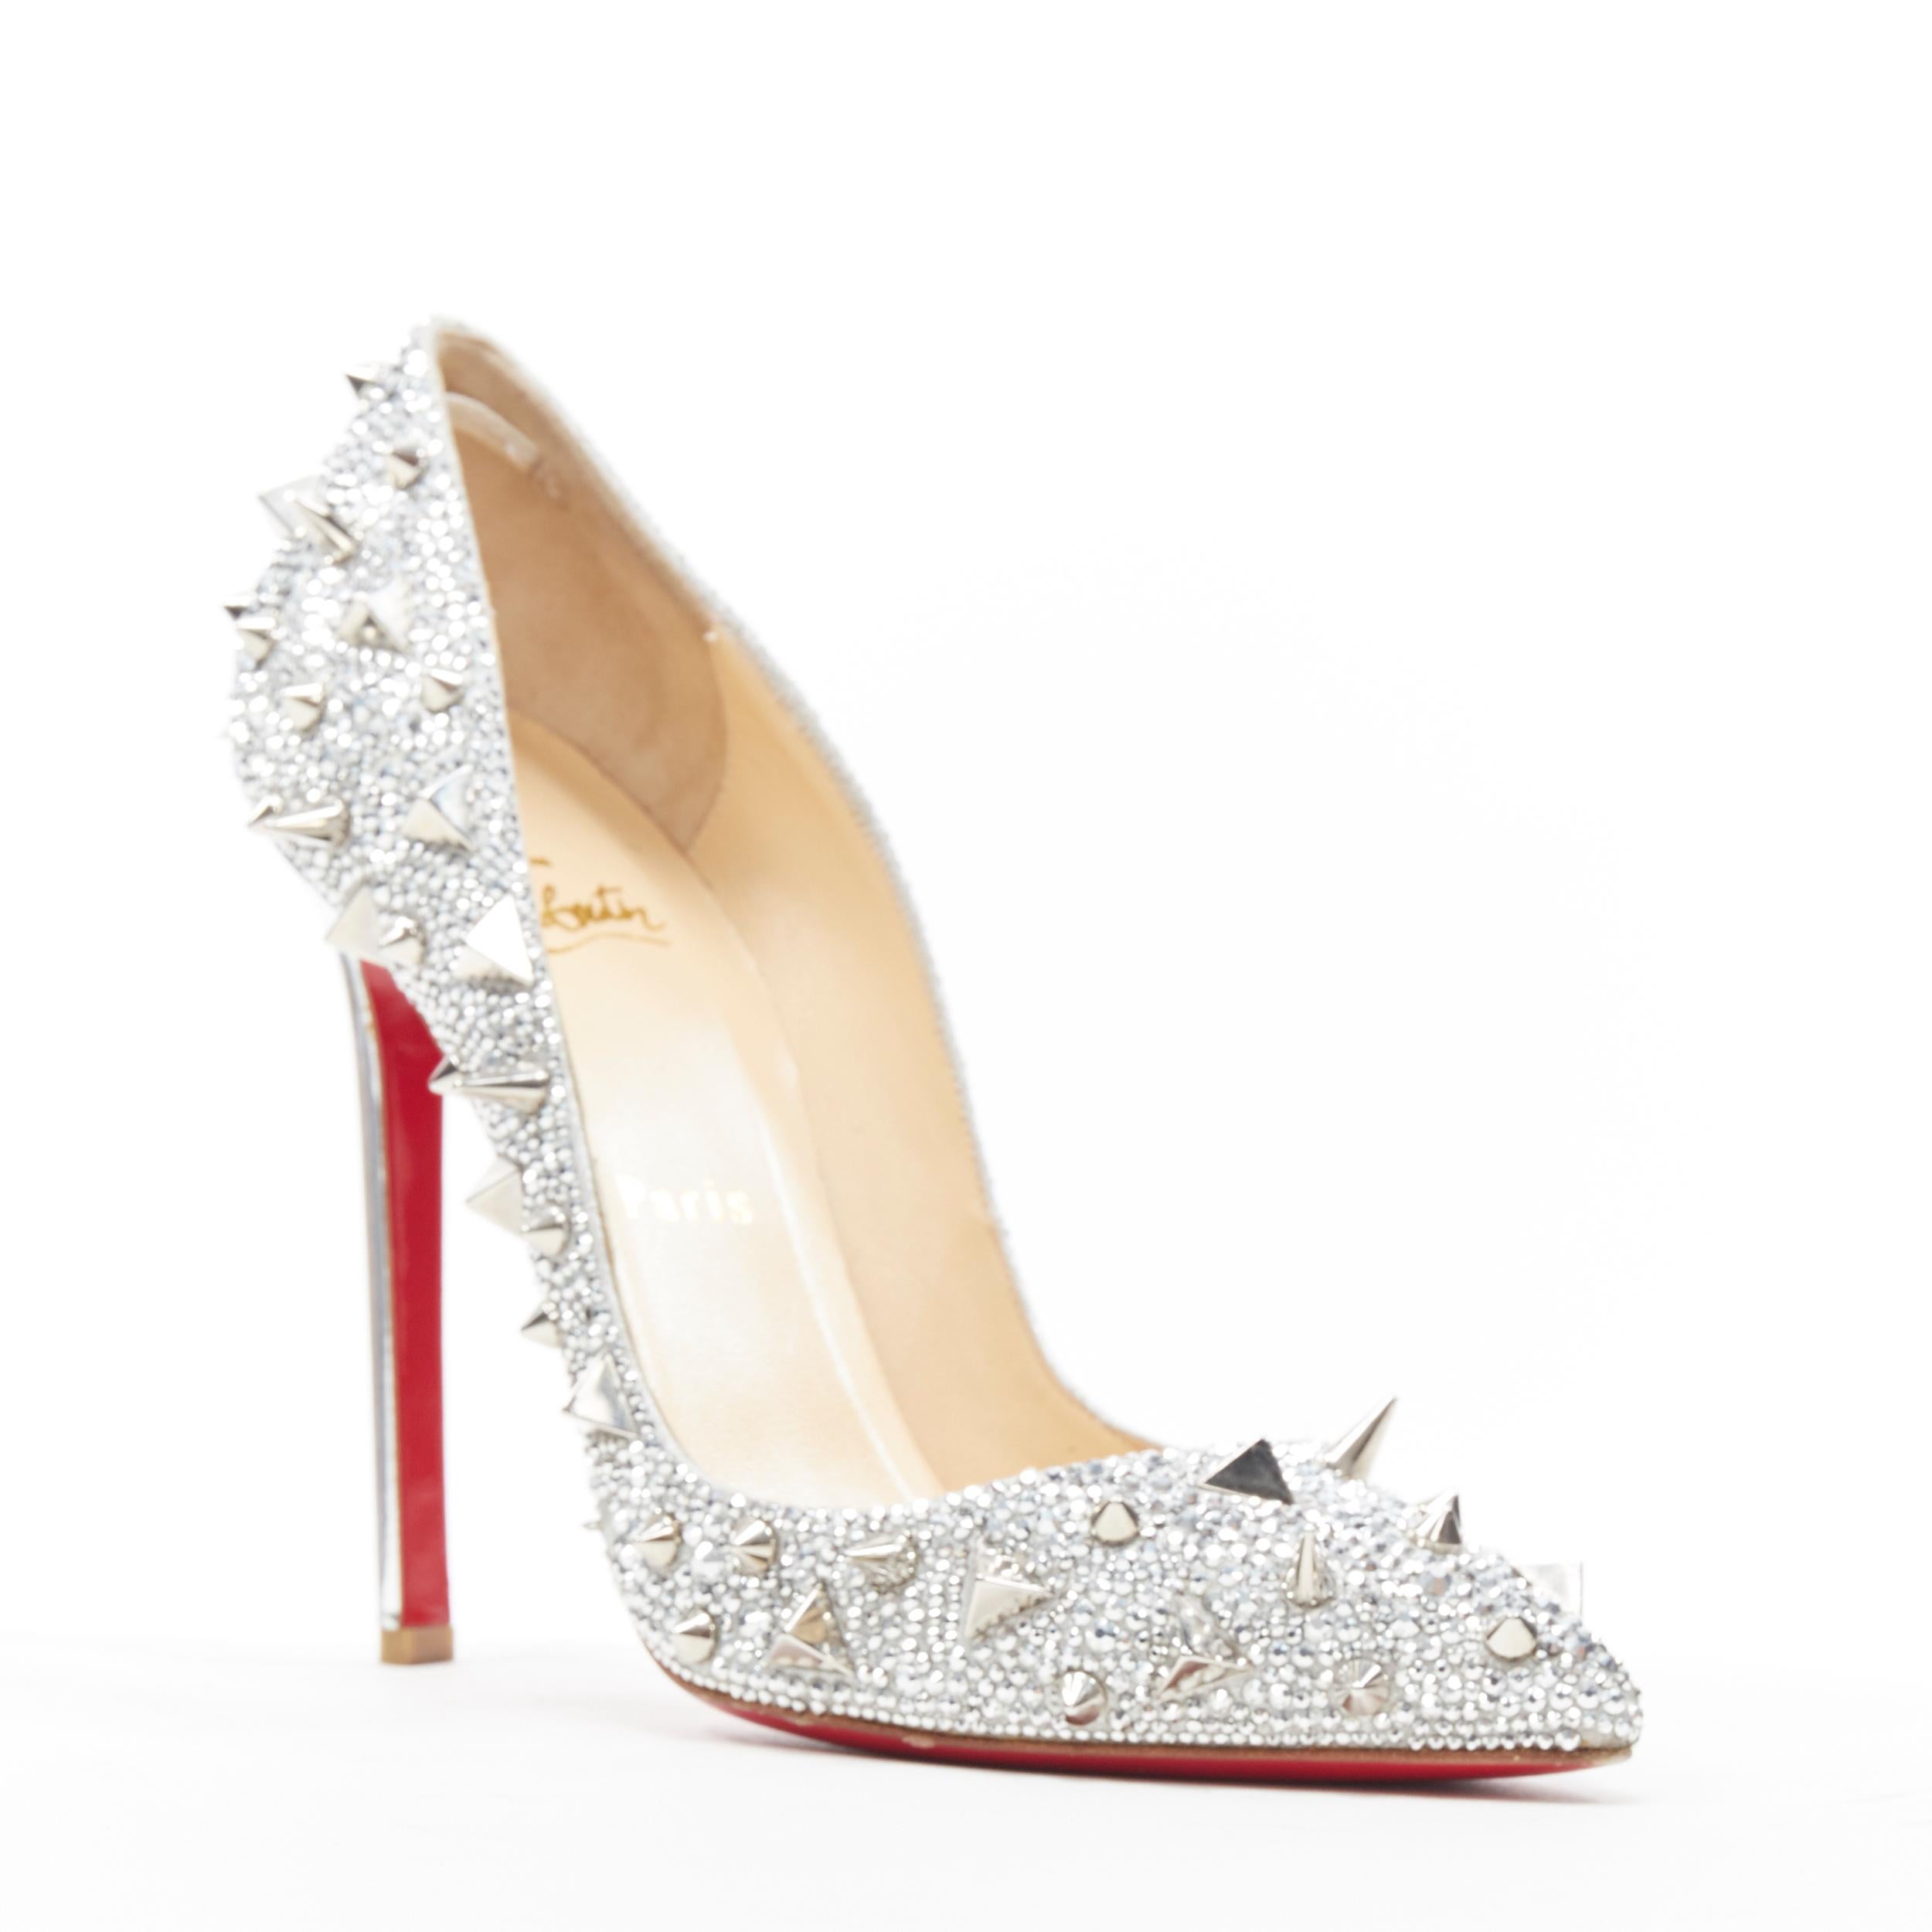 CHRISTIAN LOUBOUTIN Pigalili 120 silver strass crystal spike stud pump EU37.5
Brand: Christian Louboutin
Designer: Christian Louboutin
Model Name / Style: Pigalili 120
Material: Leather
Color: Silver
Pattern: Solid
Extra Detail: Allover crystal and